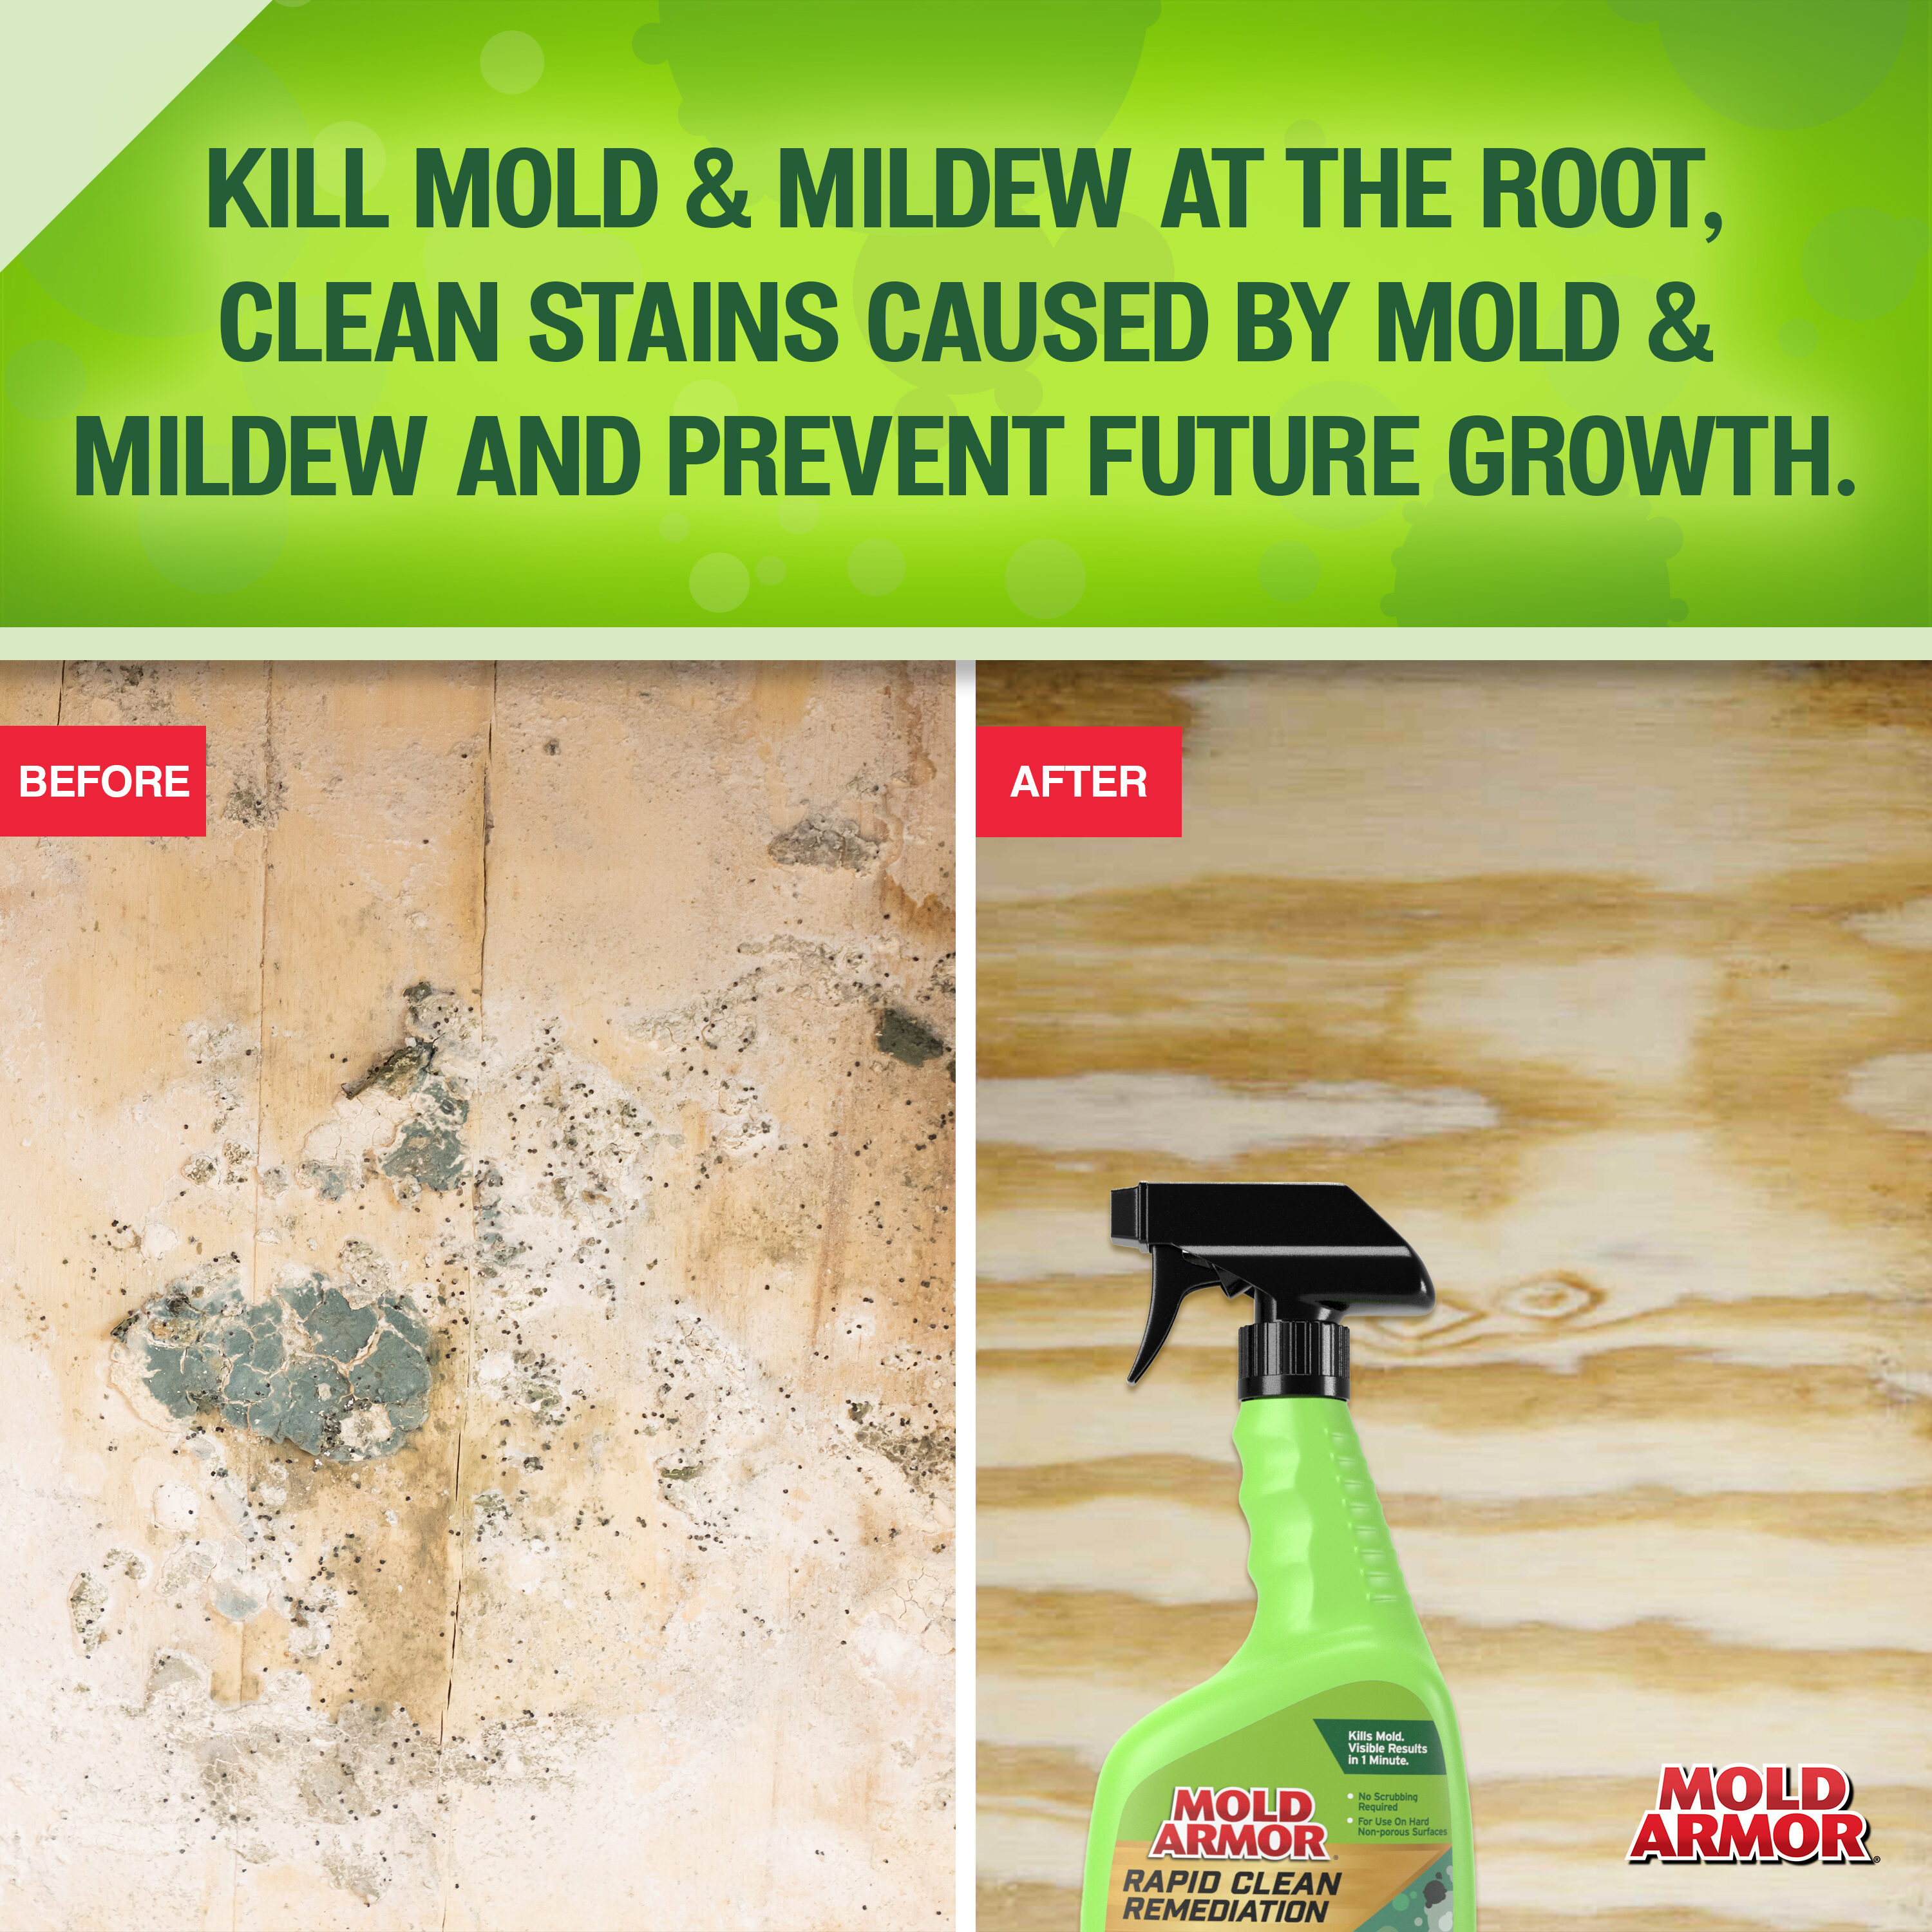 Mold Armor Waterproof Mold Blocker Spray - Prevents Mold Growth for up to 3  Months - Indoor and Outdoor Use - 32 fl oz in the Mold Removers department  at